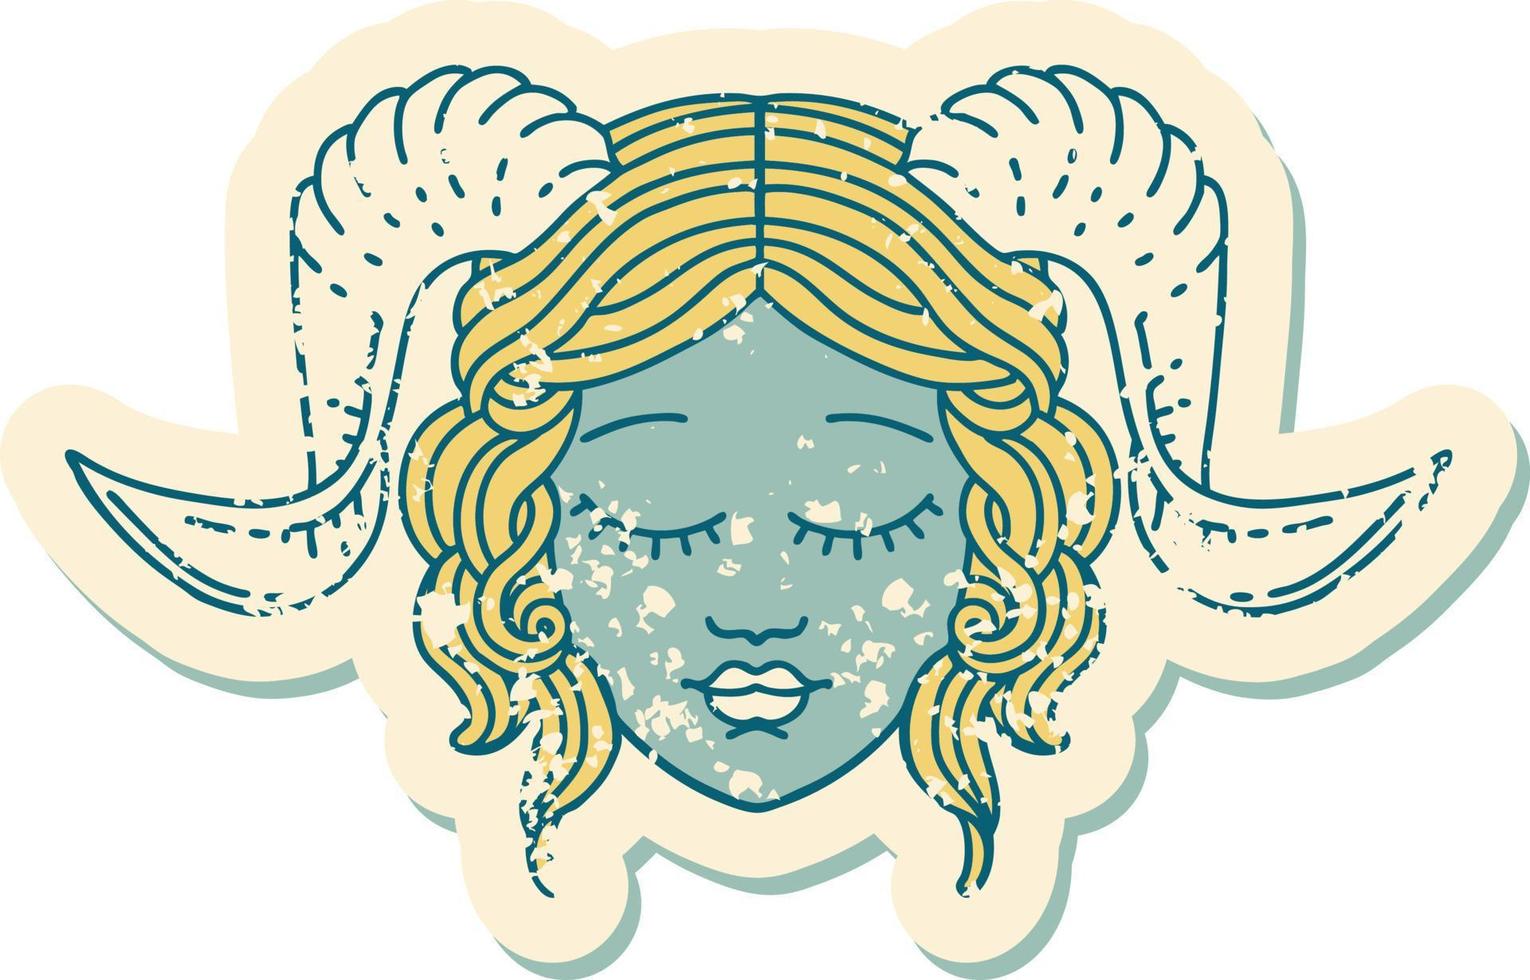 grunge sticker of a tiefling character face vector